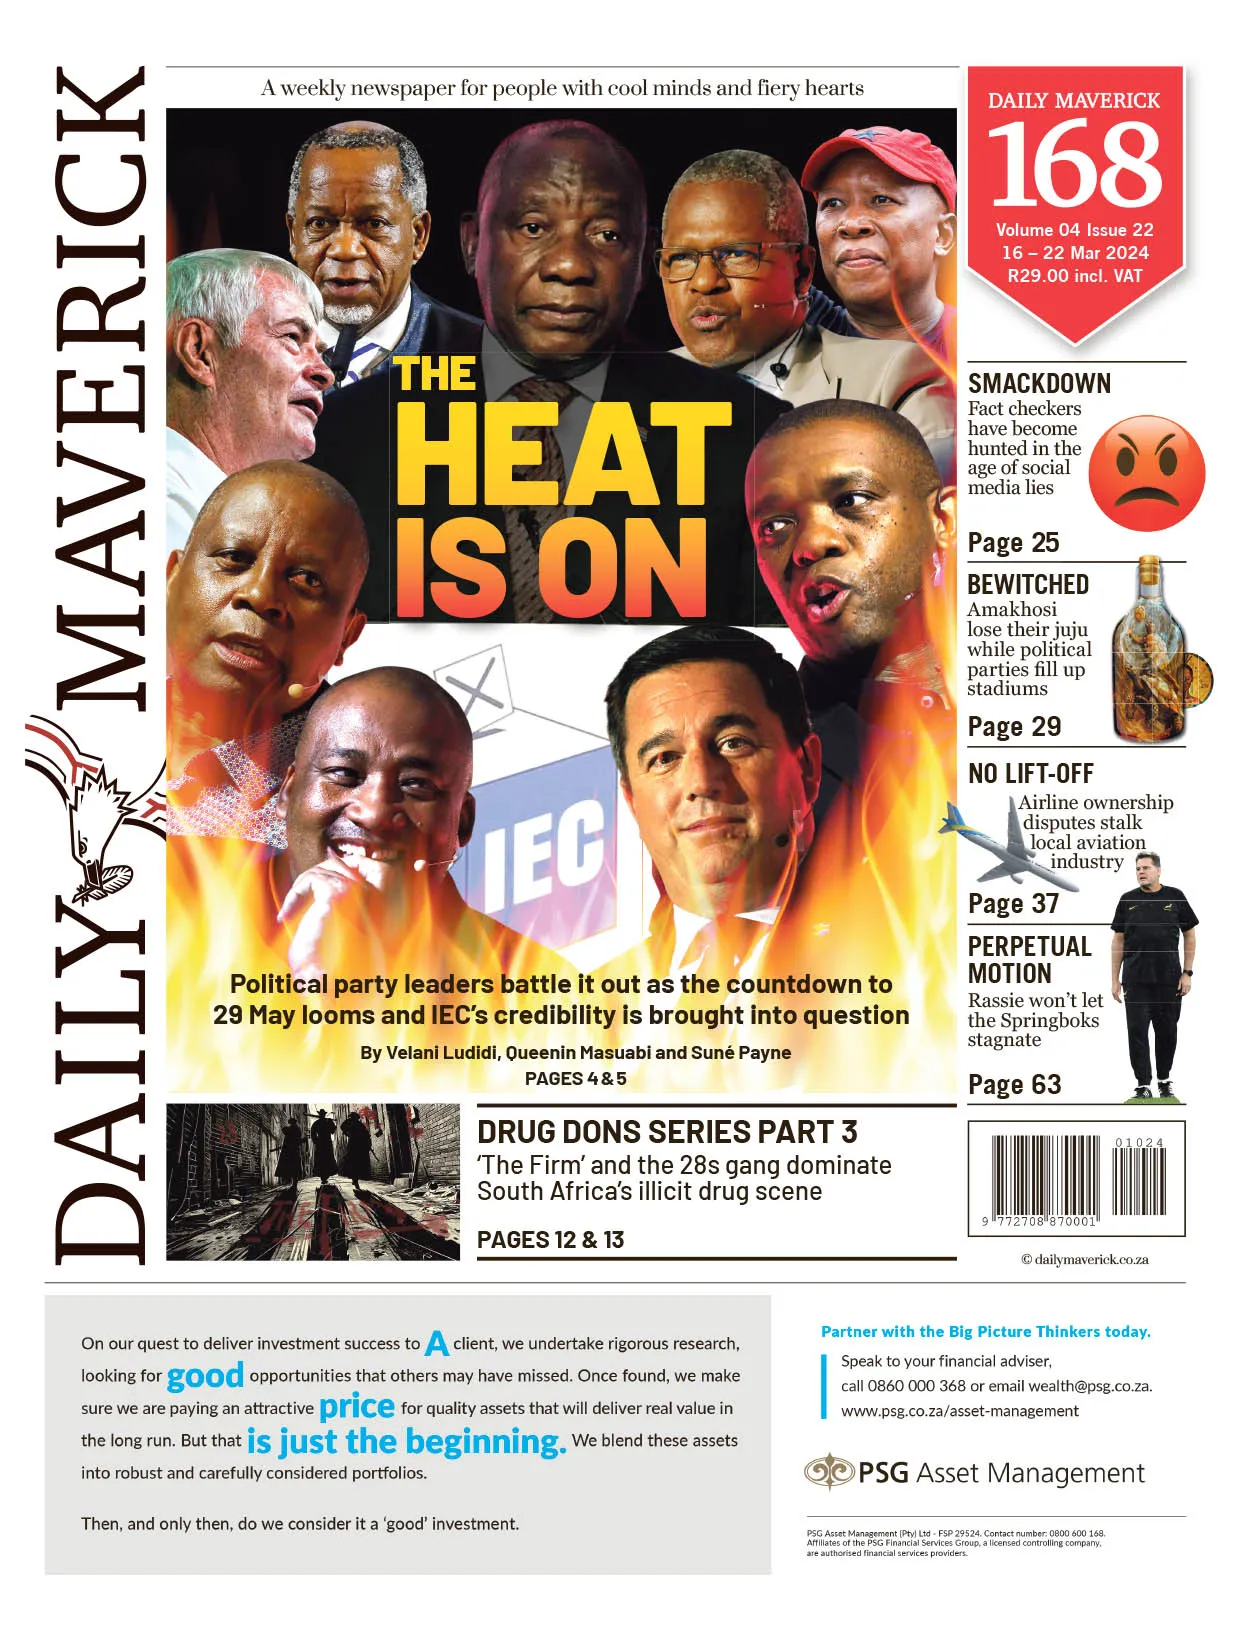 DM 168 front page